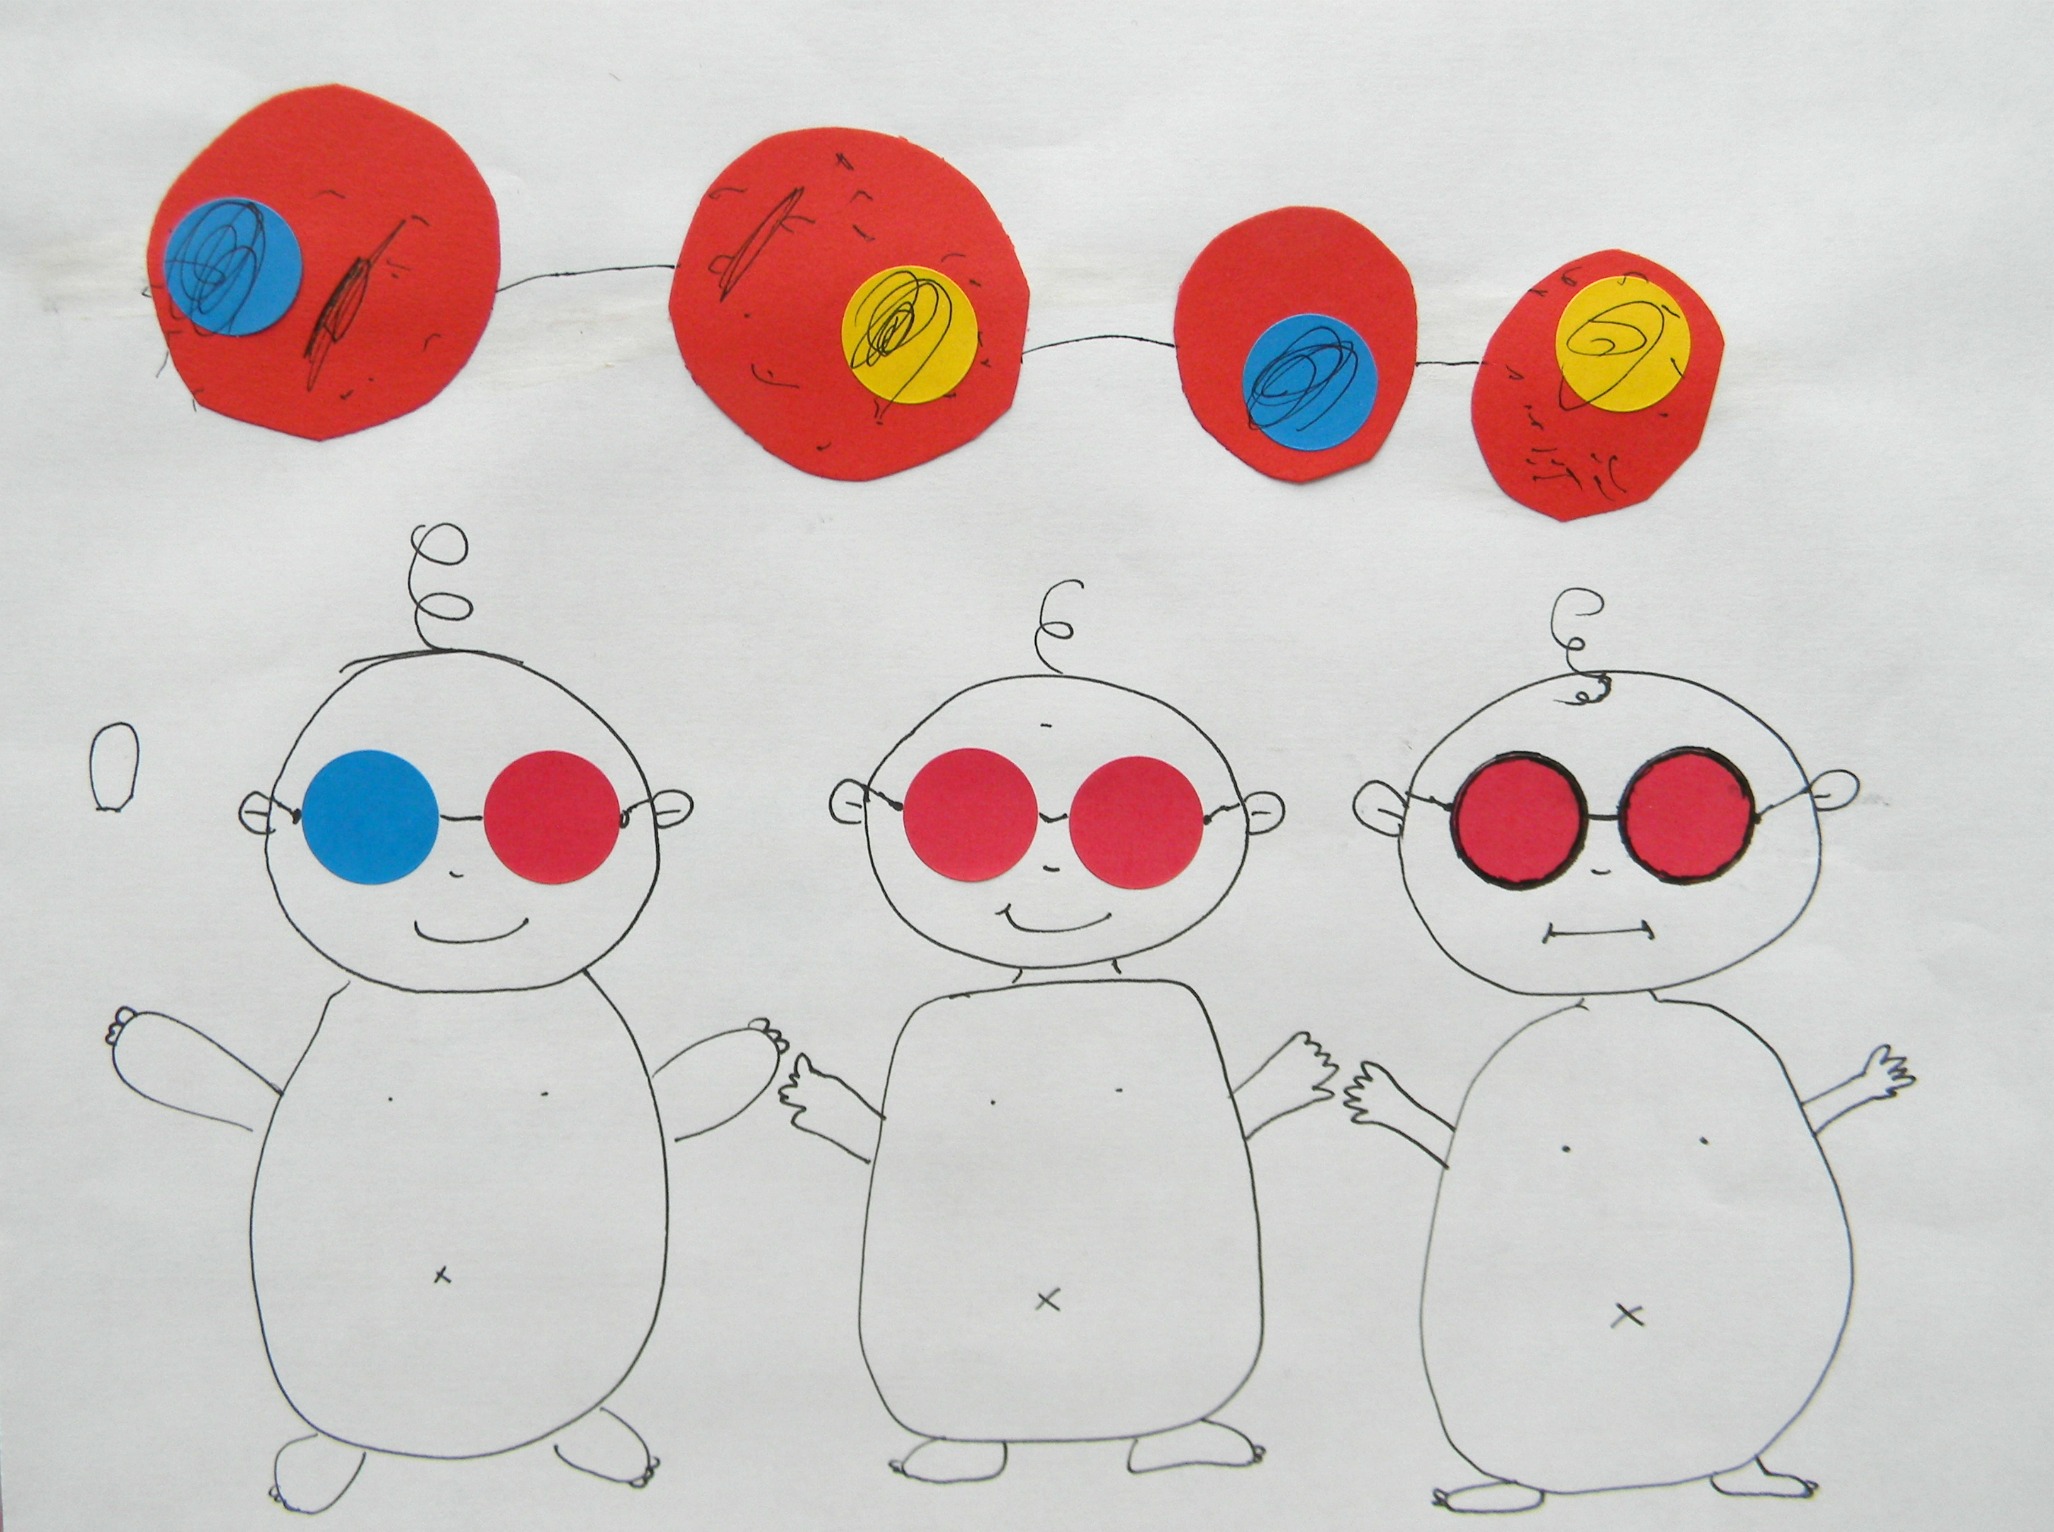 art projects for kids :: doodling with dots - A HAPPY STITCH